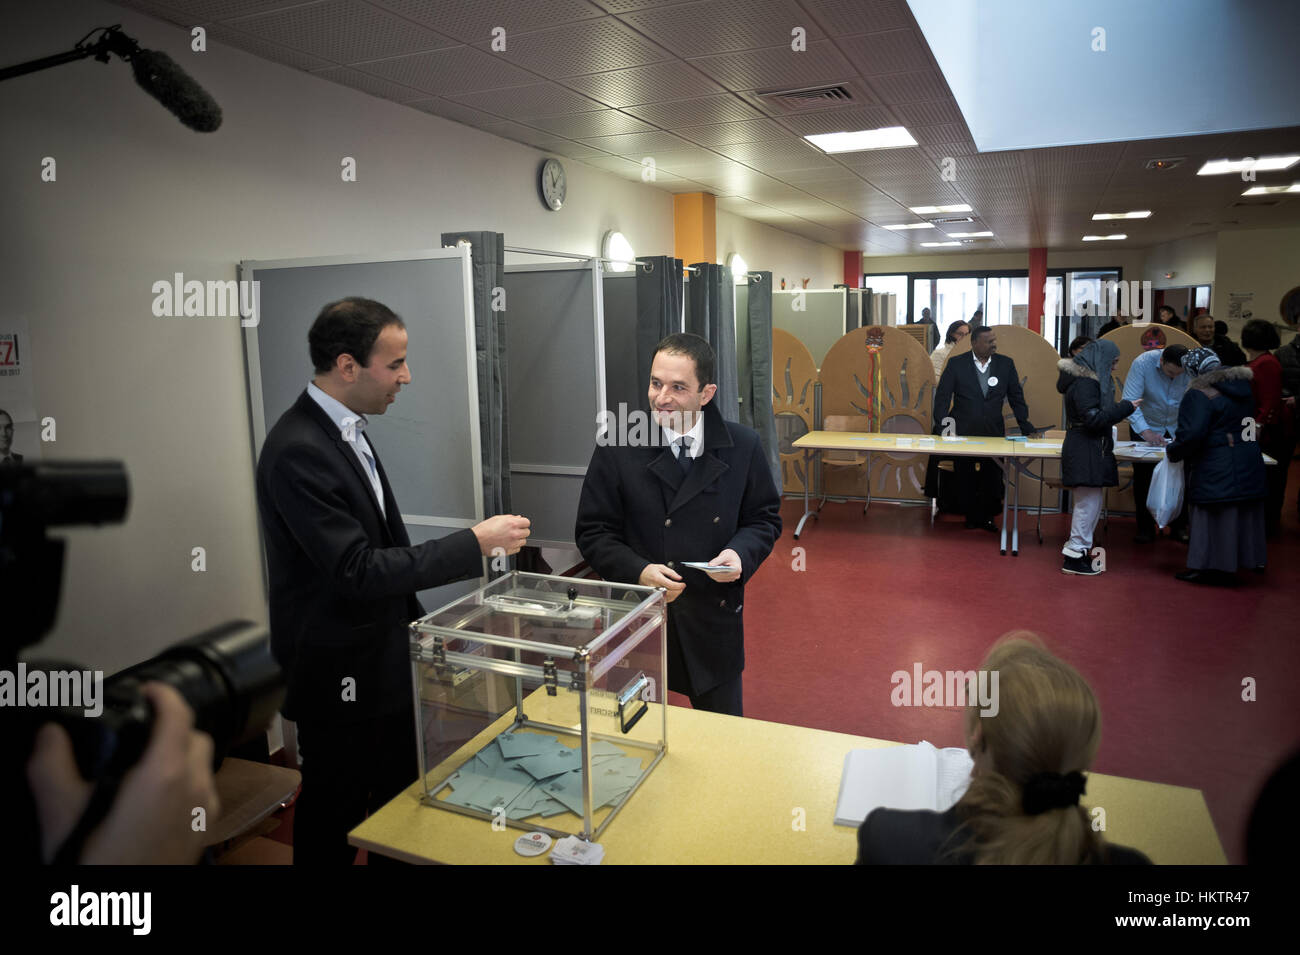 Trappes, France. 29th Jan, 2017. Benoit Hamon (C) casts his ballot during the second round of left primary at a polling station in Trappes, France. Benoit Hamon, former education minister and traditional left-winger, on Sunday became the Left candidate for France's upcoming presidential election after beating his rival Manuel Valls in the primary run-off, partial results showed. Credit: Xinhua/Alamy Live News Stock Photo